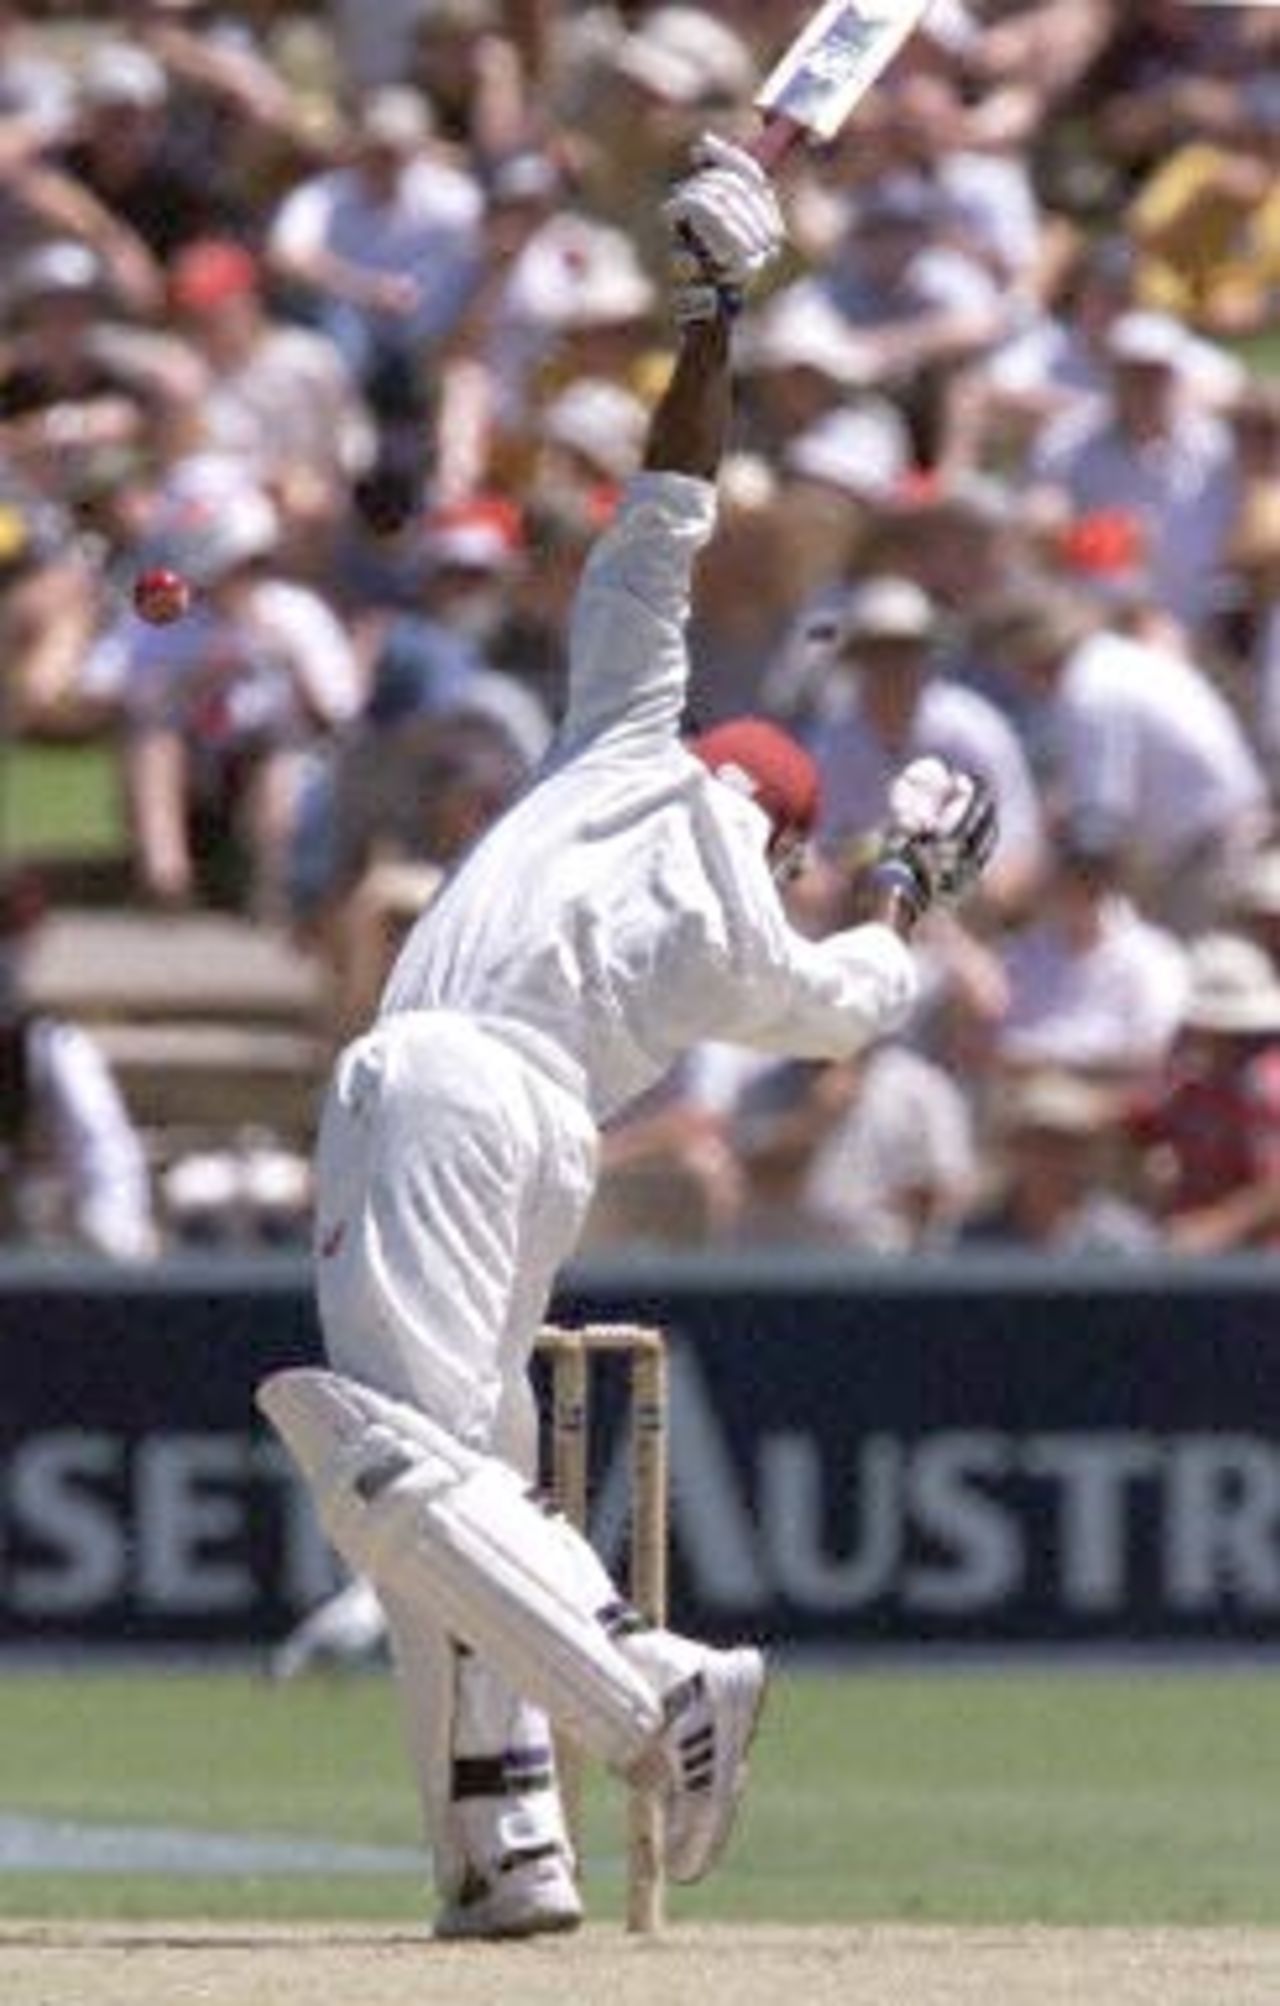 West Indies opening batsman Sherwin Campbell takes evasive action from a bouncer delivered by fast bowler Glenn McGrath during the first day of the third test against the West Indies at the Adelaide oval 15 December 2000. At lunch the West Indies are 2 for 61 runs, with Australia currently leading the five test series against the West Indies 2-0.